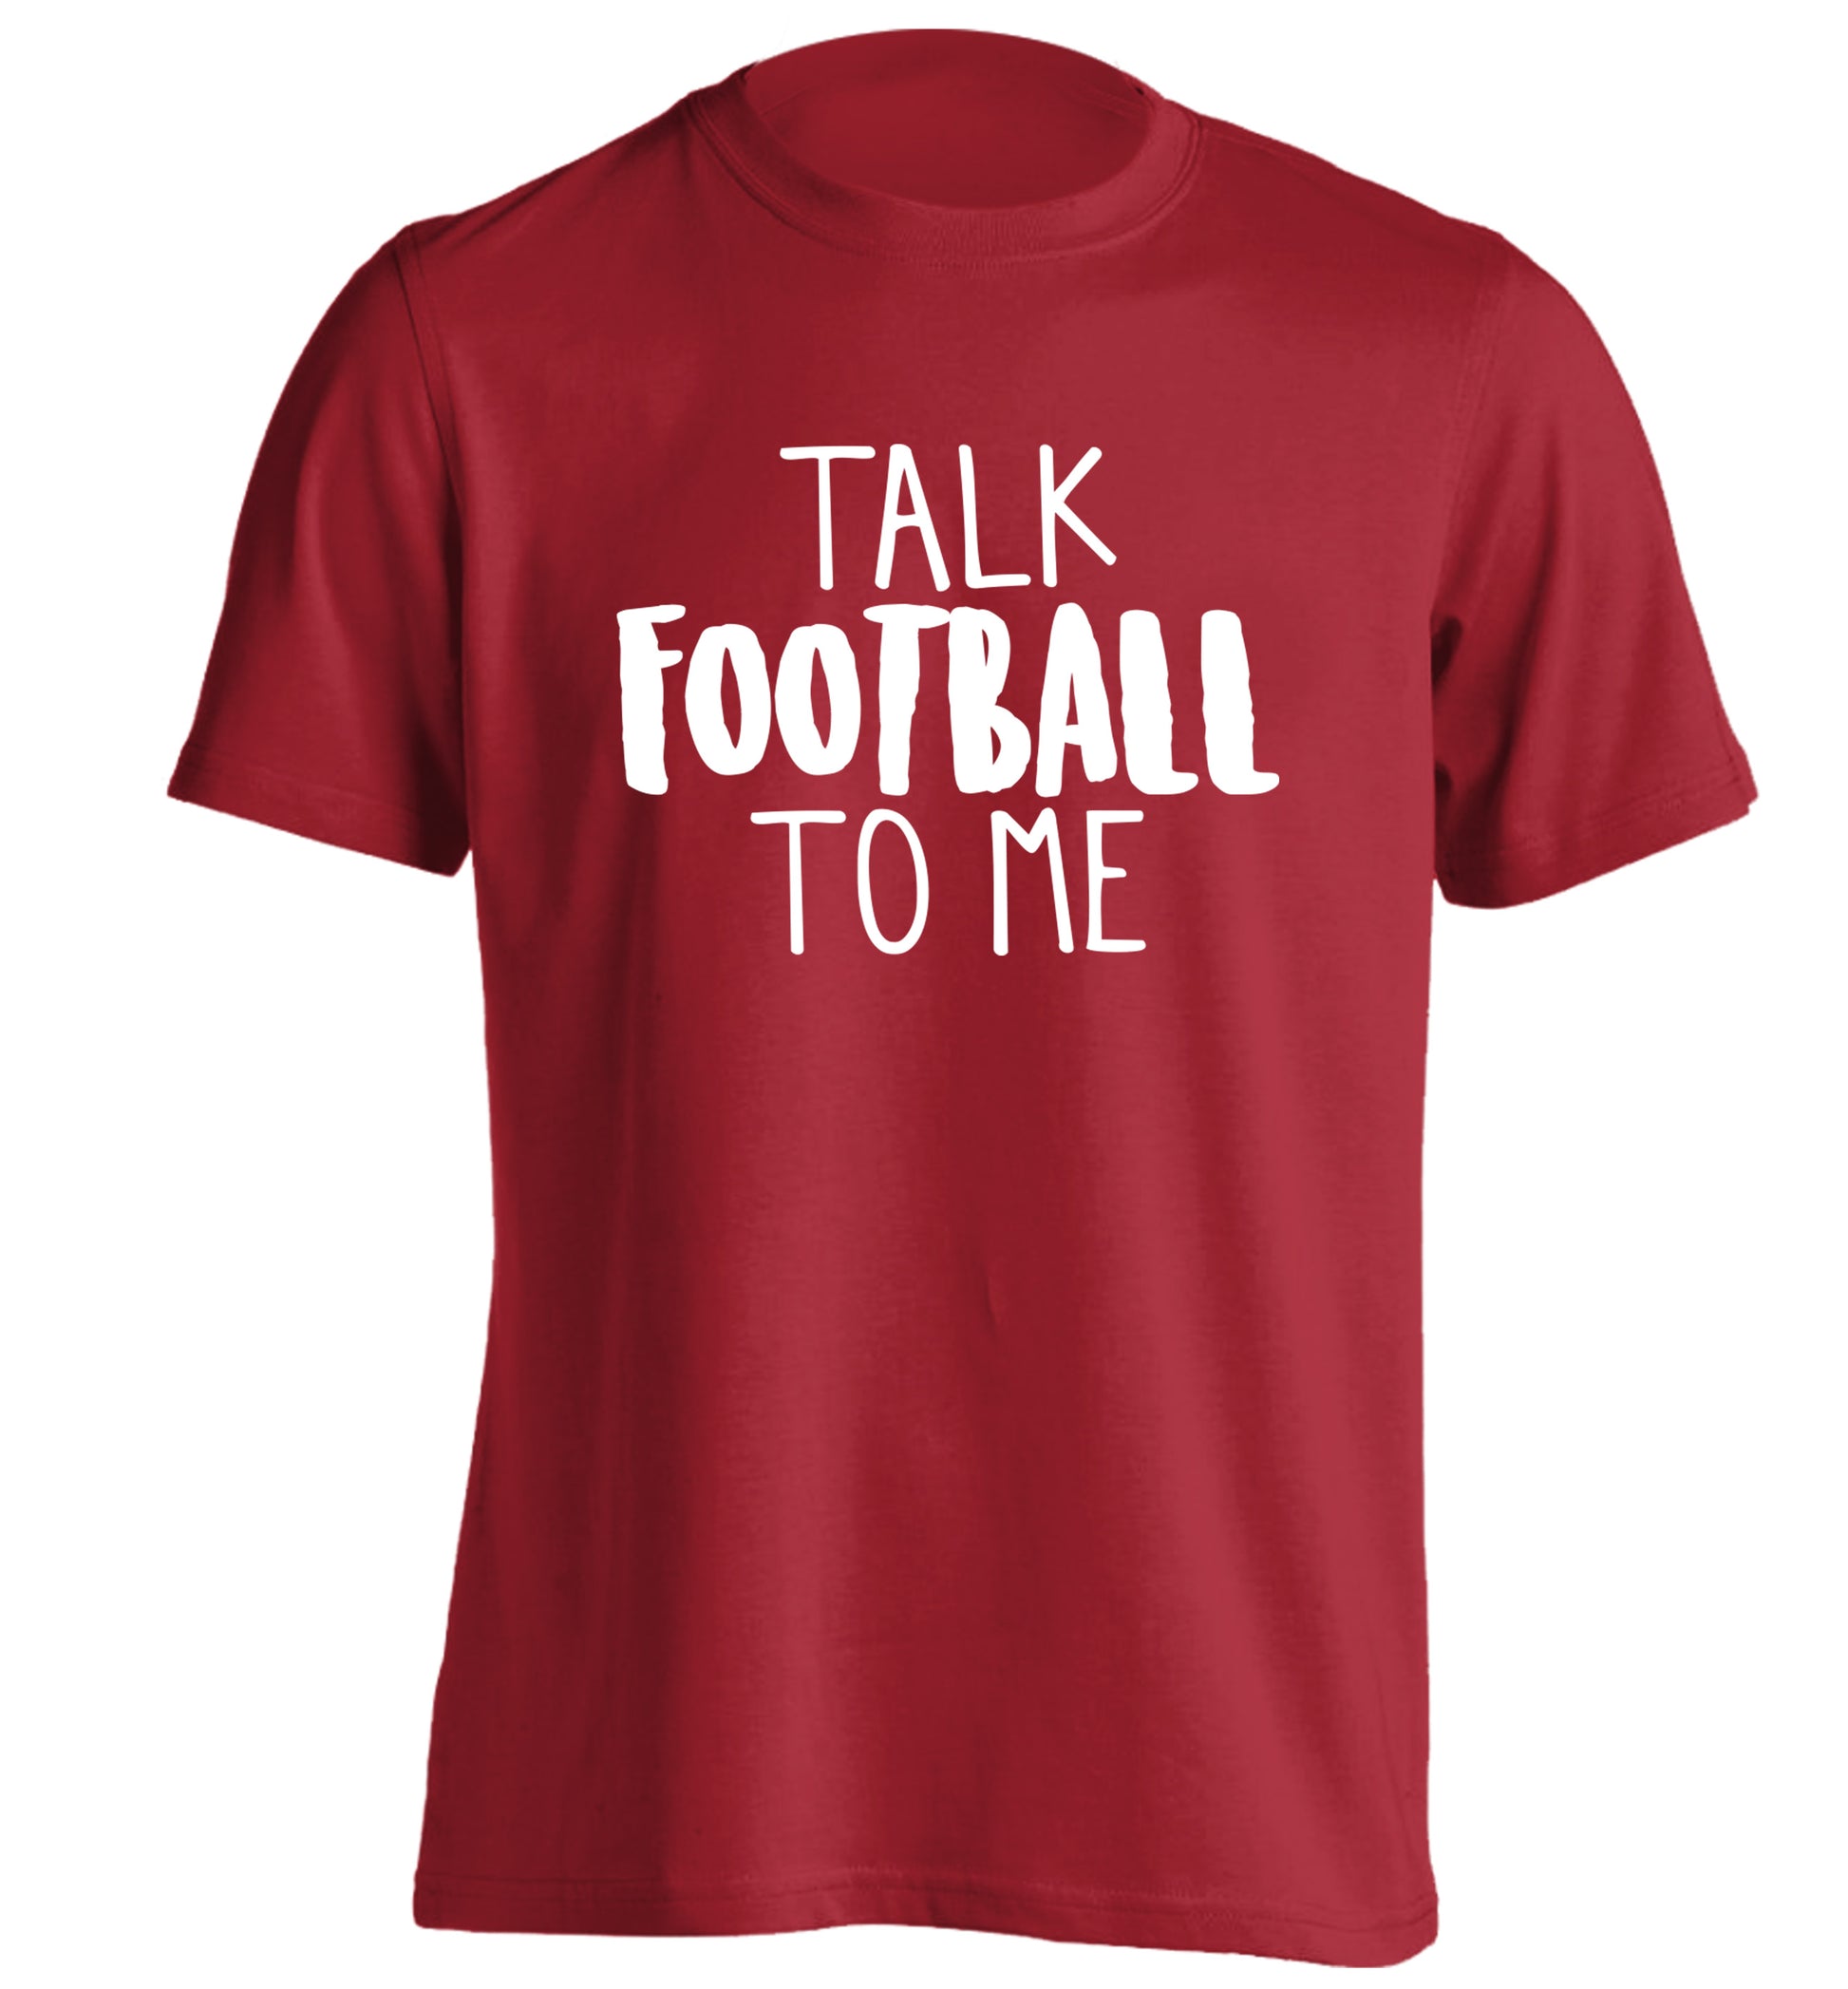 Talk football to me adults unisexred Tshirt 2XL